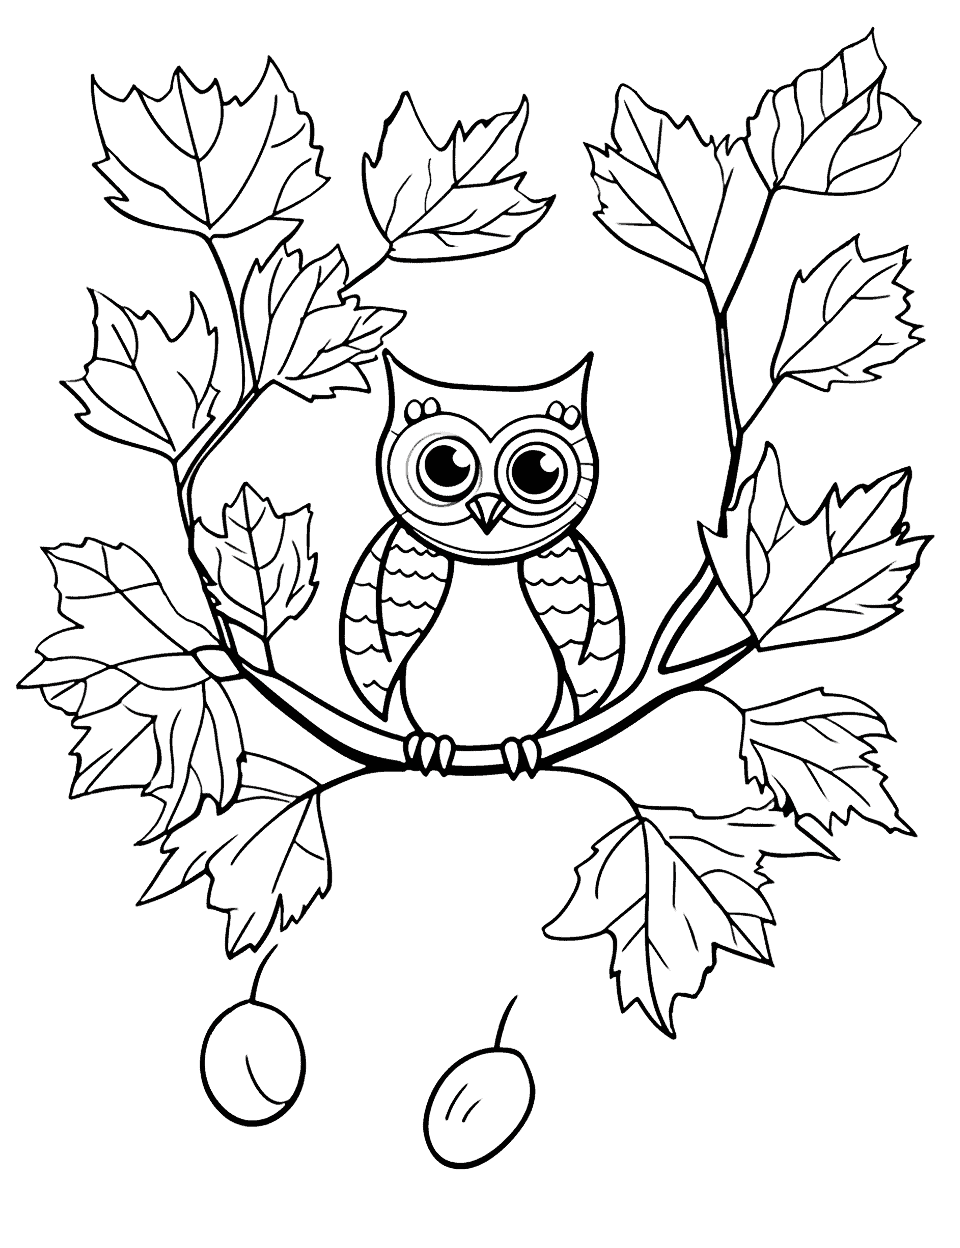 Happy Fall Owl in Tree Coloring Page - A cute owl perched on a branch surrounded by autumn leaves.